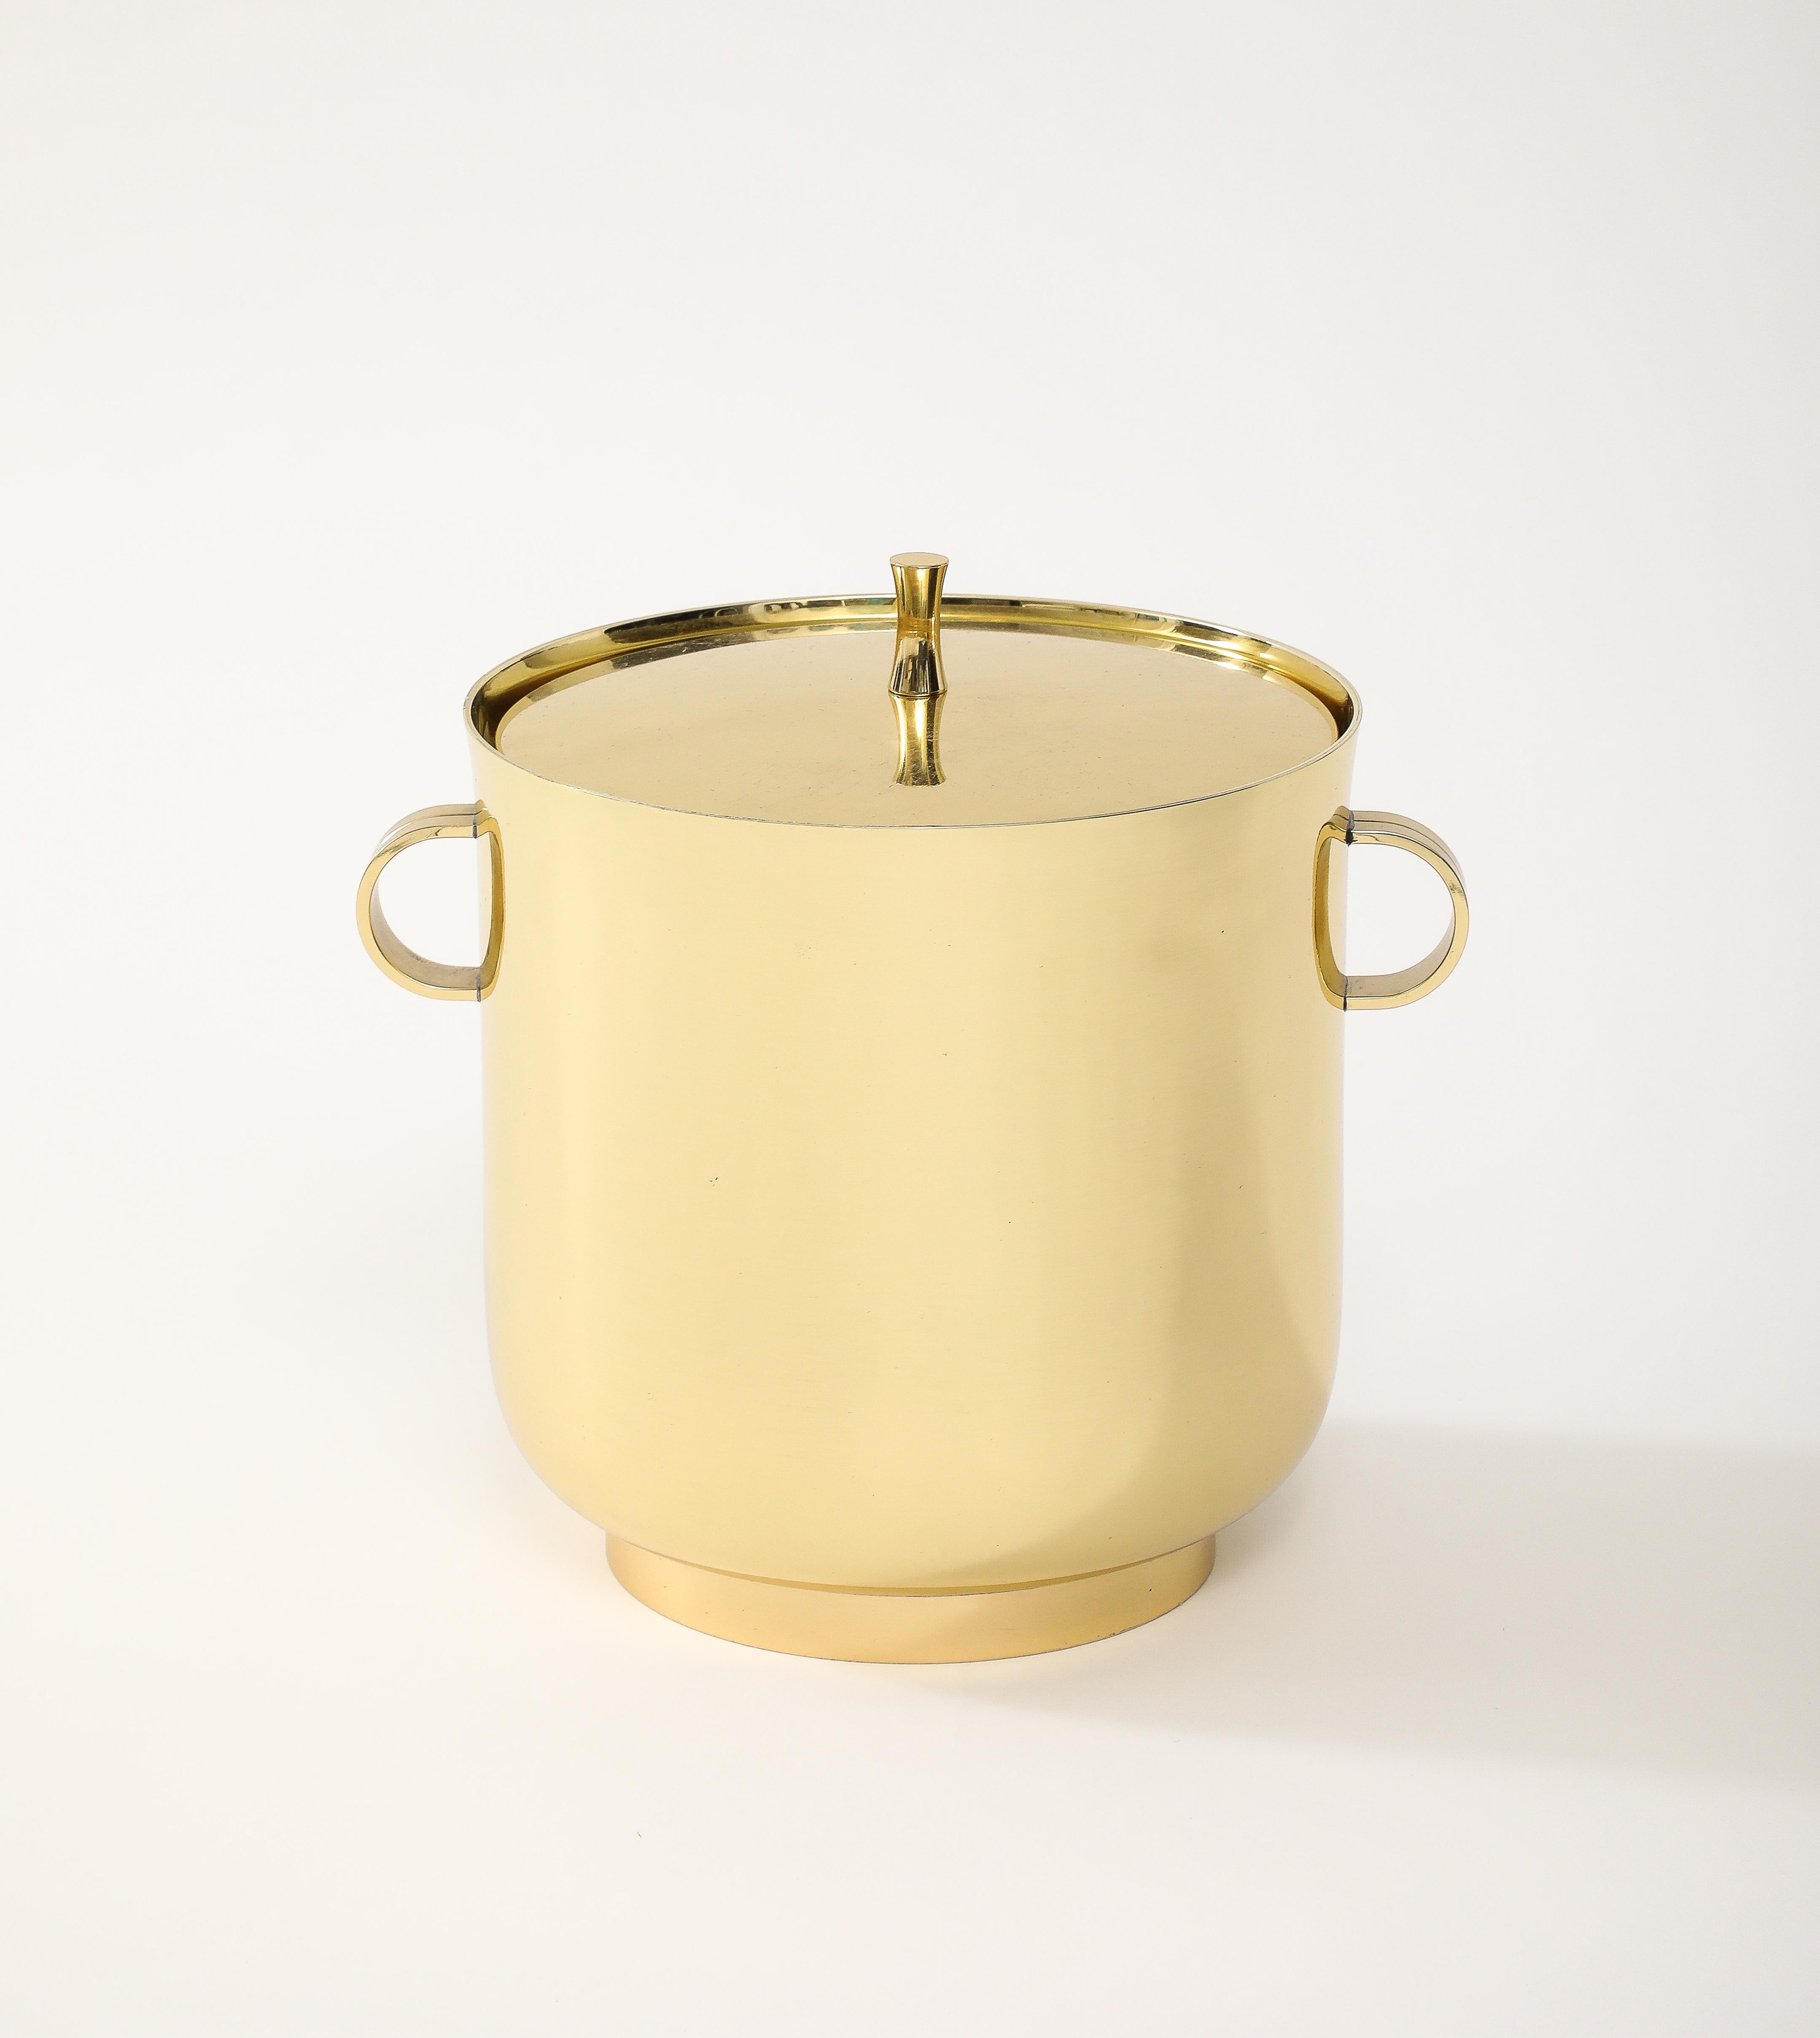 Modernist brass ice bucket with a mercury glass liner designed ny Tommi Parzinger for Dorlyn. Professionally polished and lacquered.